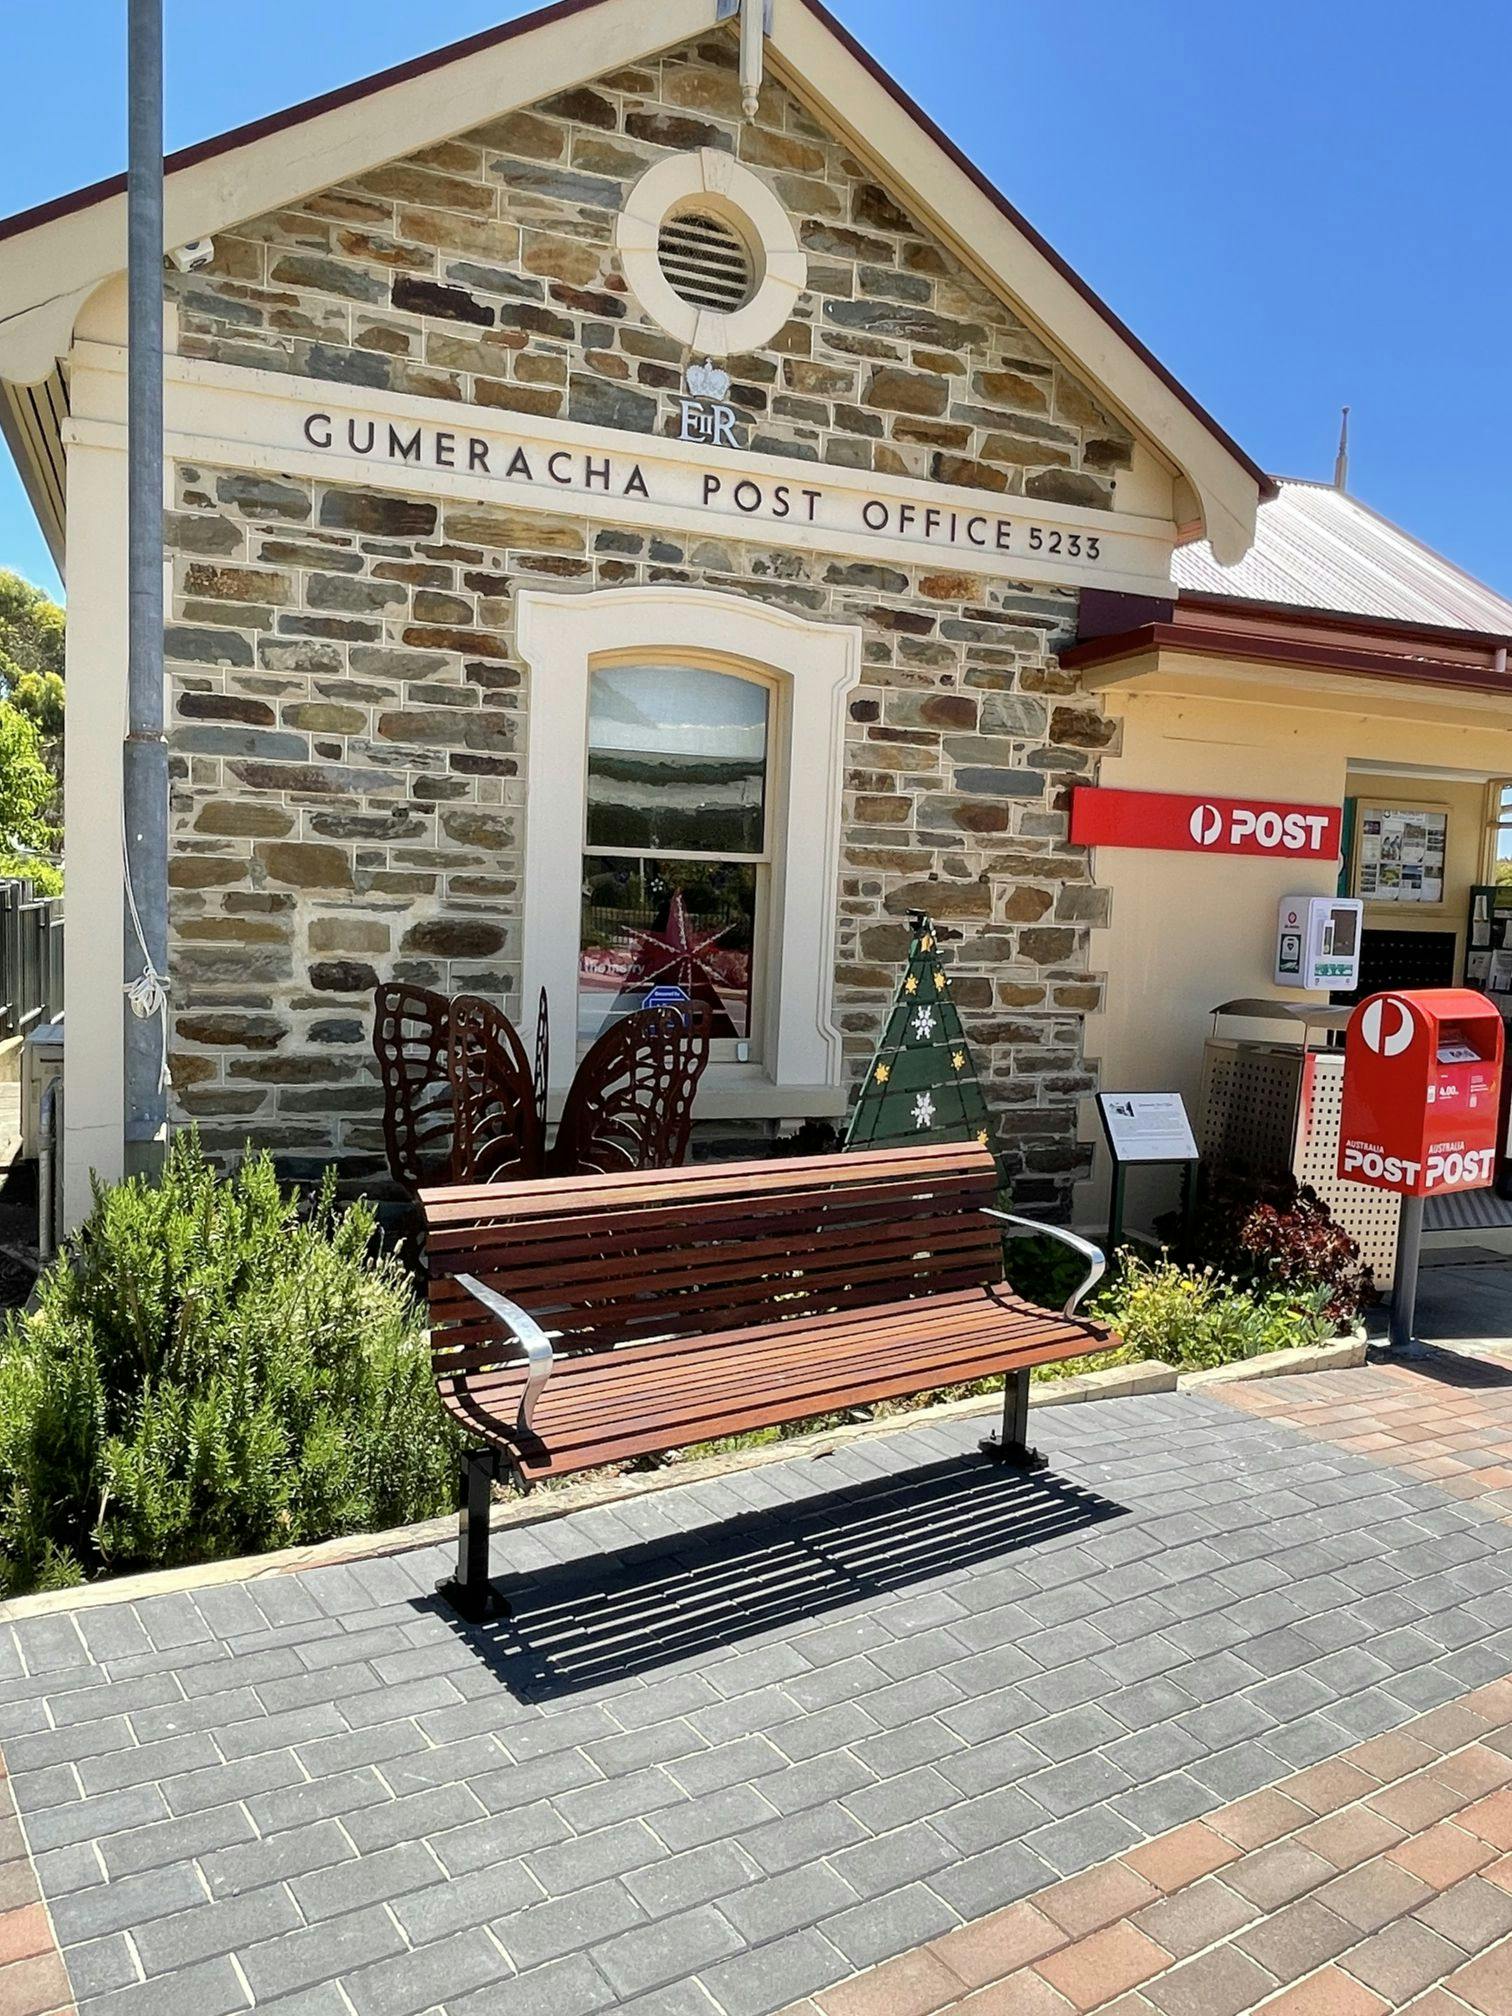 New bench and paving out the front of the Post Office